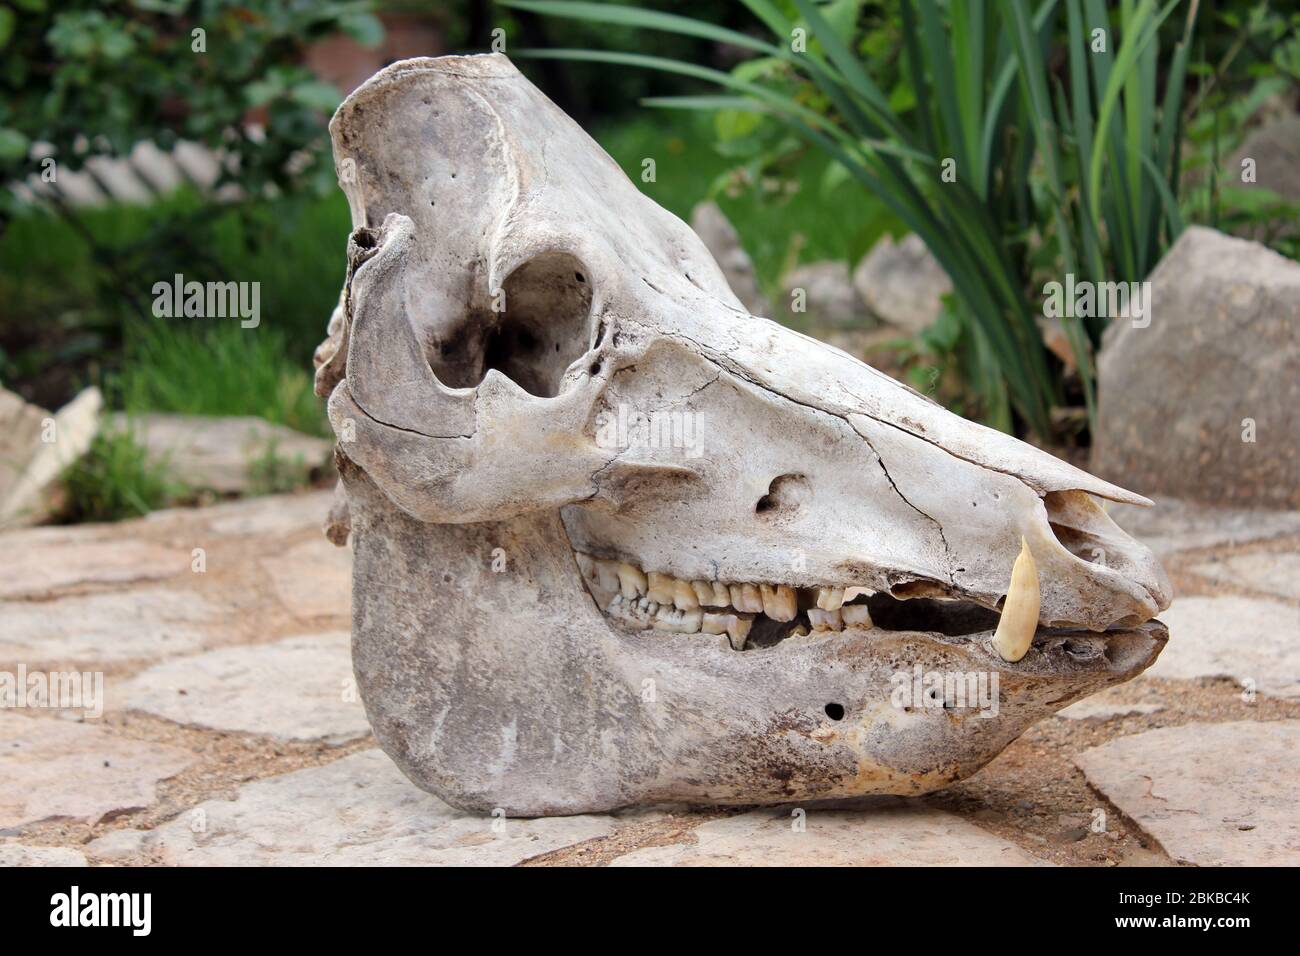 Complete skull of a domestic pig Stock Photo